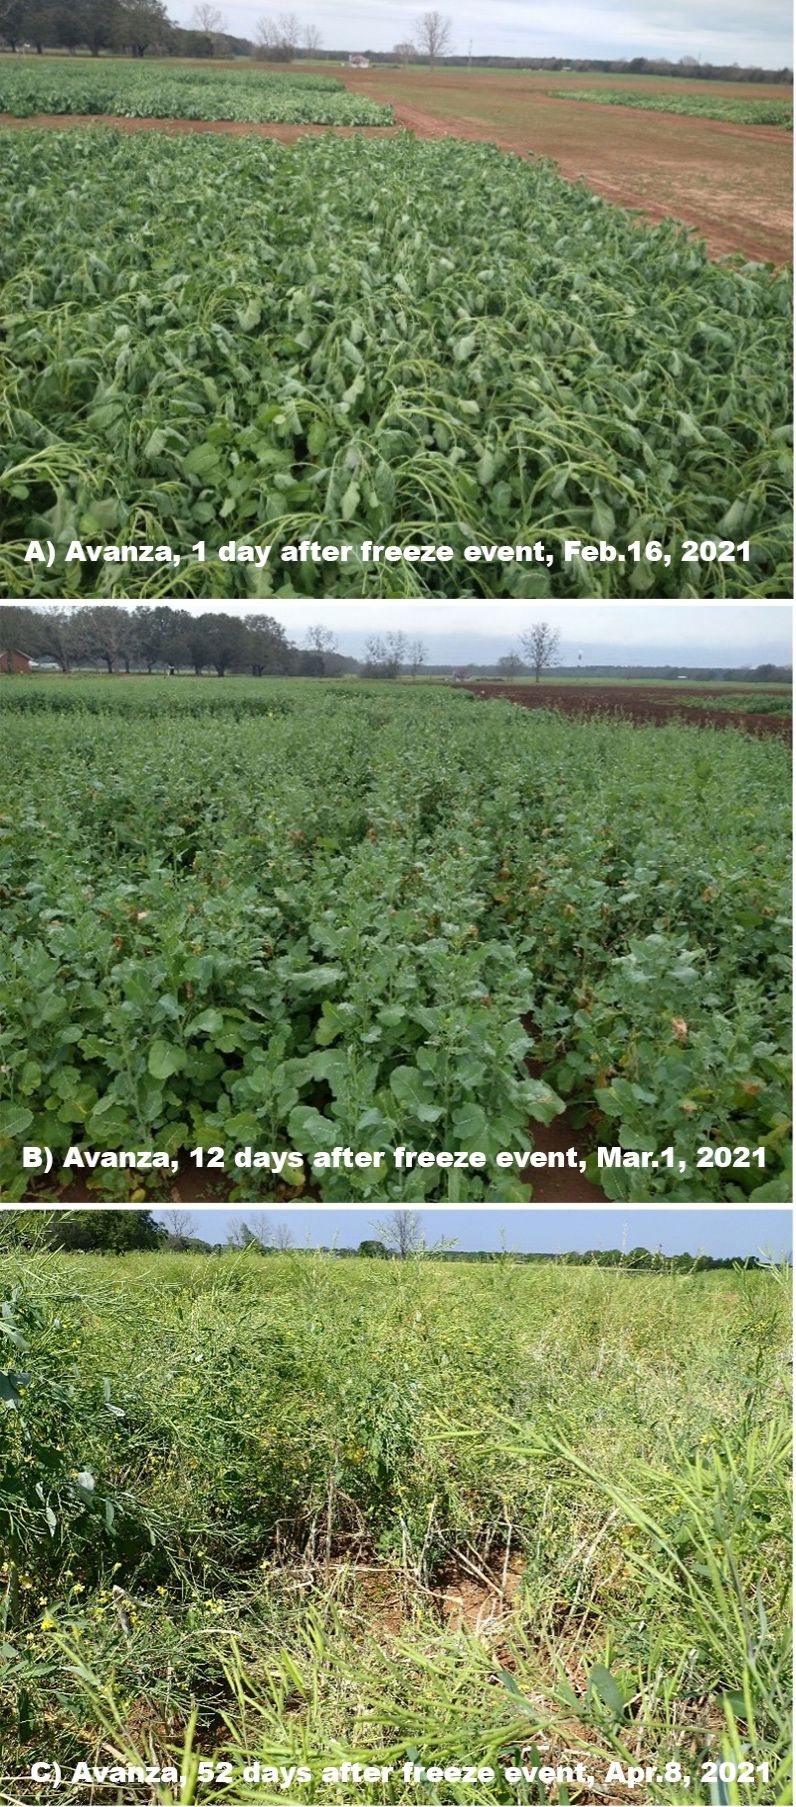 Freeze damage observed a day after a hard freeze event in the commercial variety Avanza at the bolting growth stage (A, February 16, 2021), 12 days after the freeze (B, March 1, 2021) and at pod fill (C, April 8, 2021). This plot suffered 55% damage at pod fill (note: damage assessment was based on lodging and death of the main stem in the plant). UF/IFAS West Florida Research and Education Center, Jay, FL. 